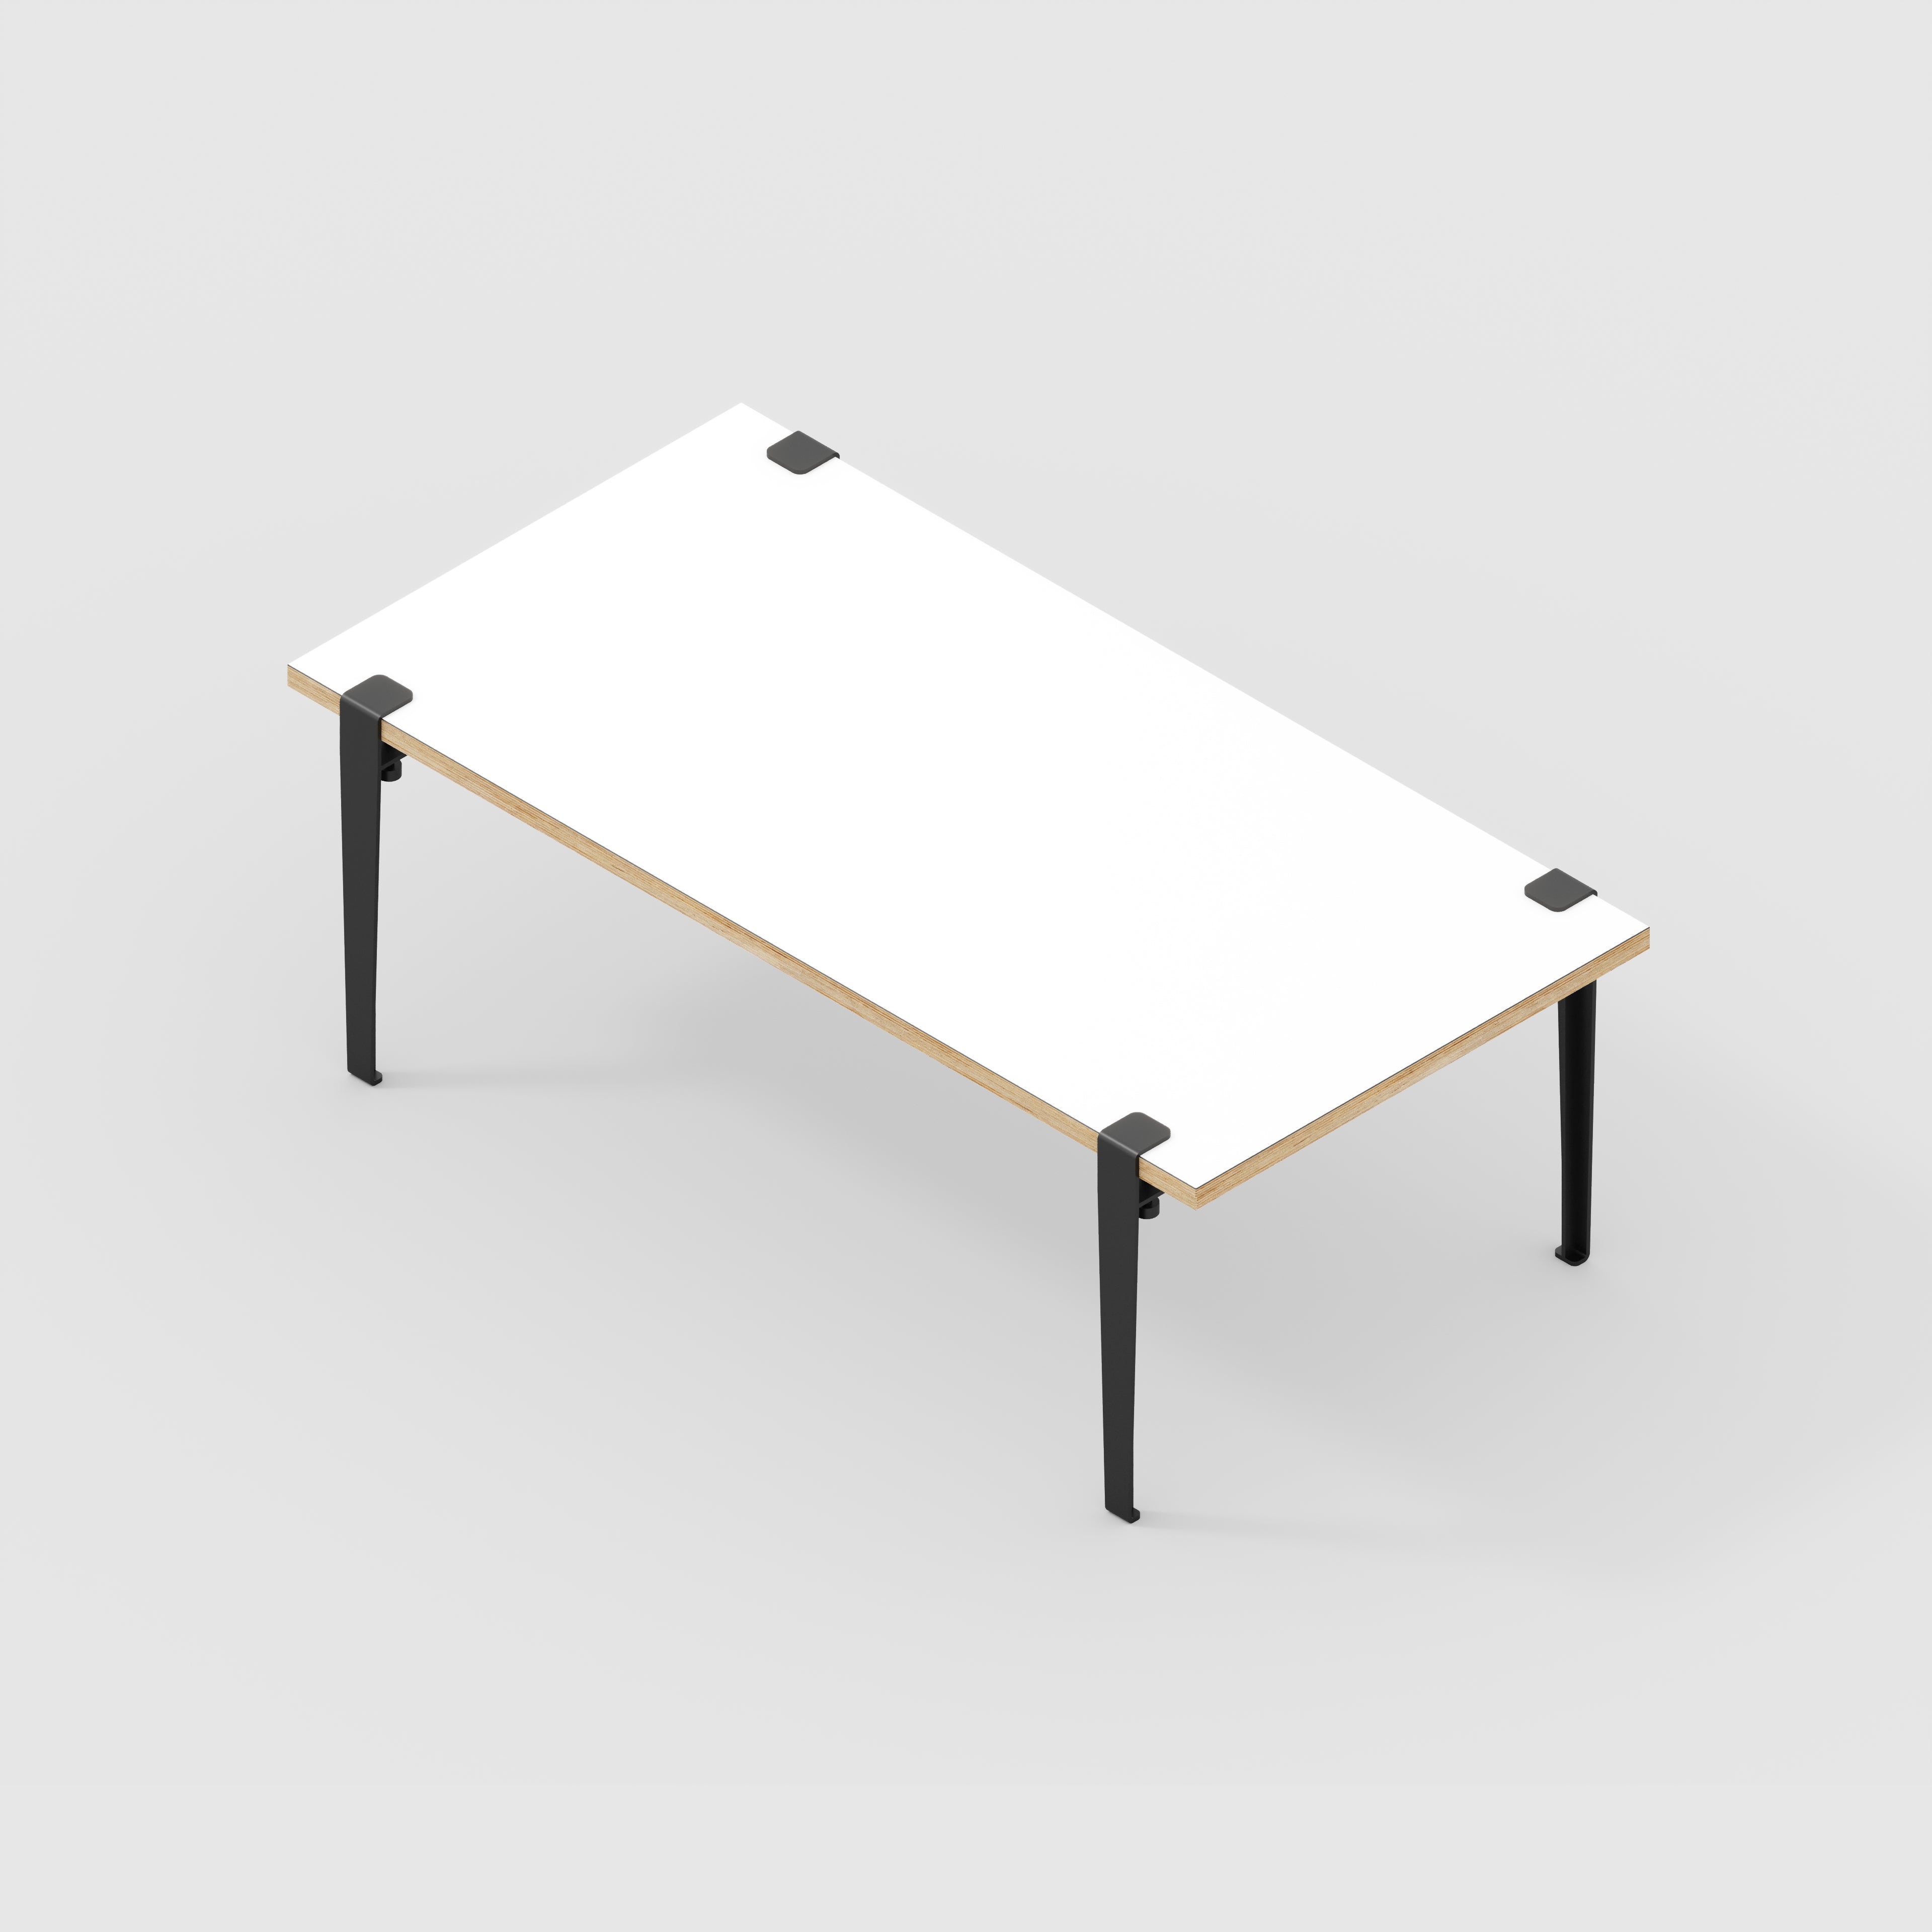 Coffee Table with Black Tiptoe Legs - Formica White - 1200(w) x 600(d) x 430(h)